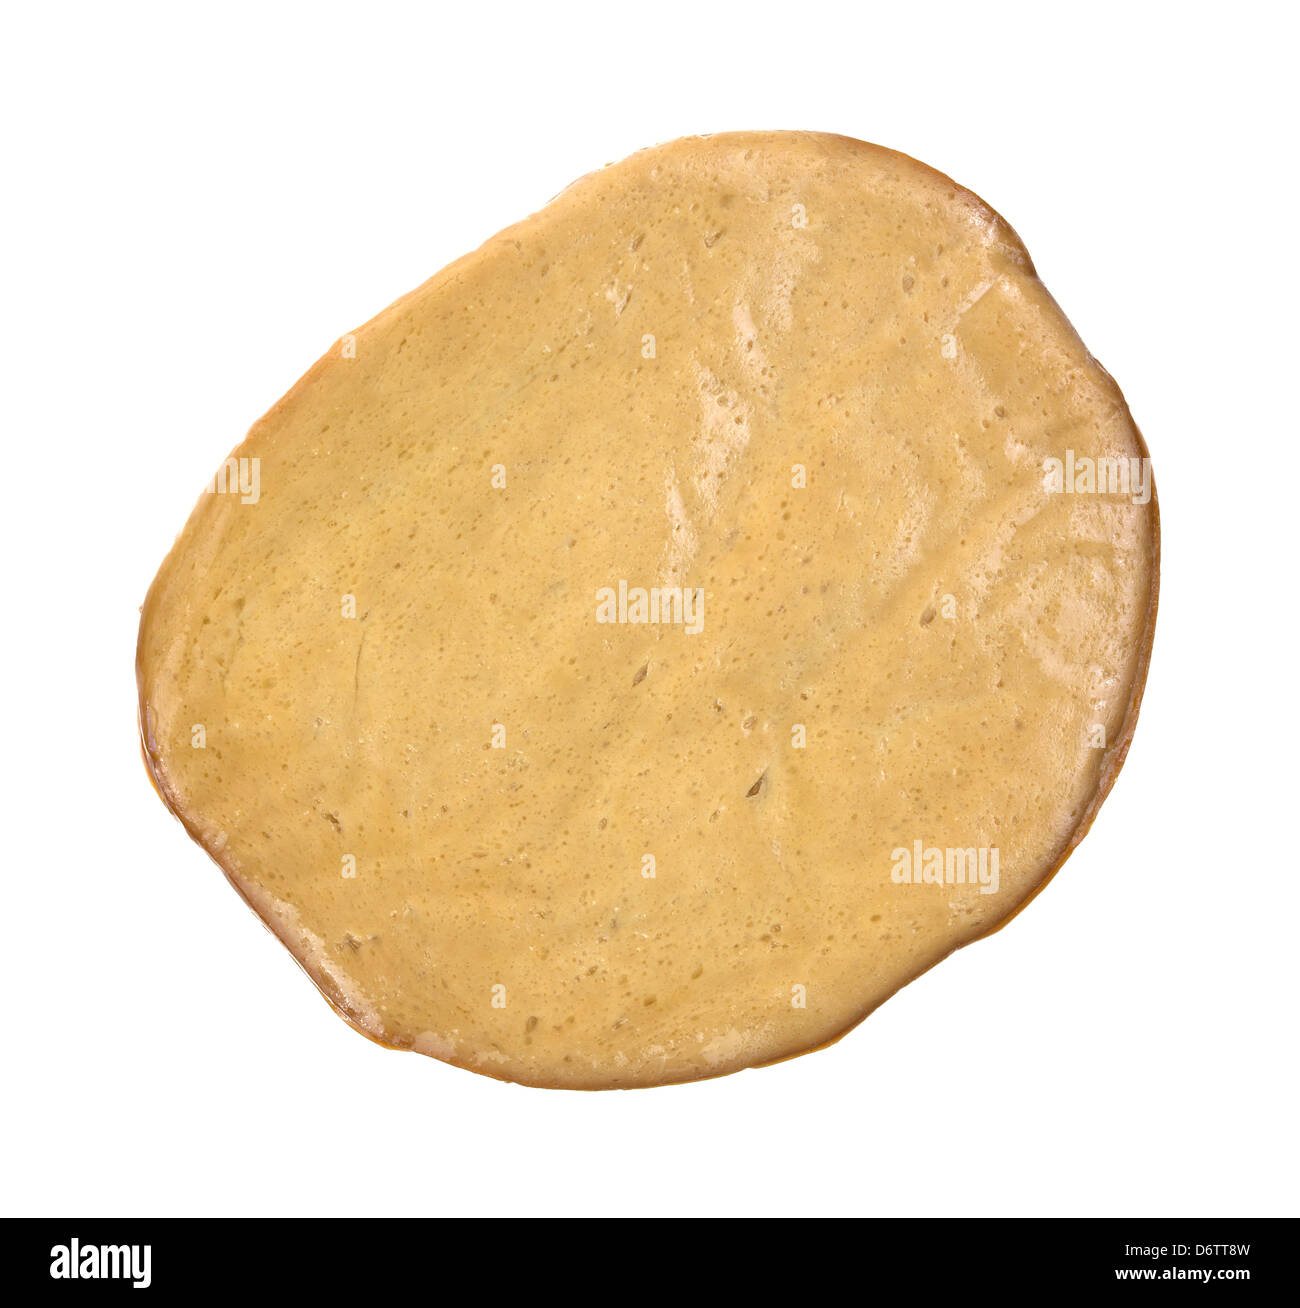 Top view of several slices of tofu meatless turkey luncheon meat on a white background. Stock Photo